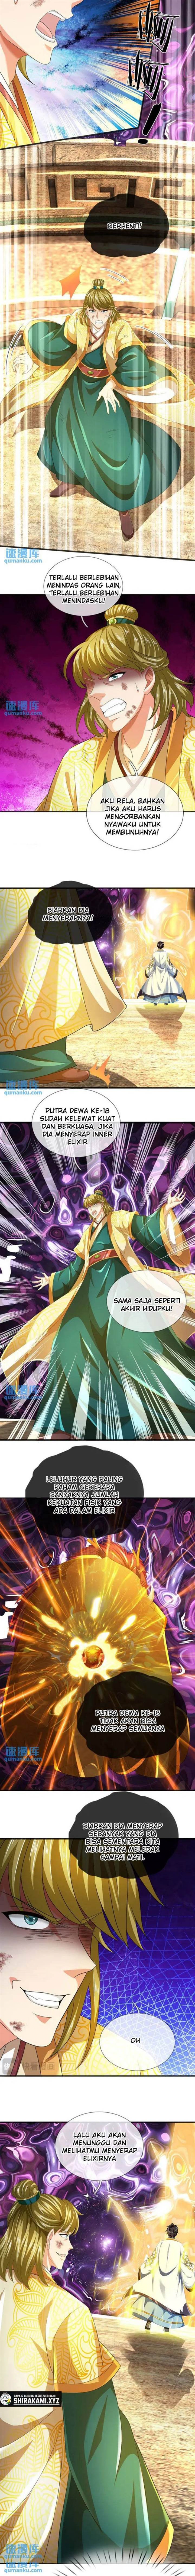 Star Sign In To Supreme Dantian Chapter 281